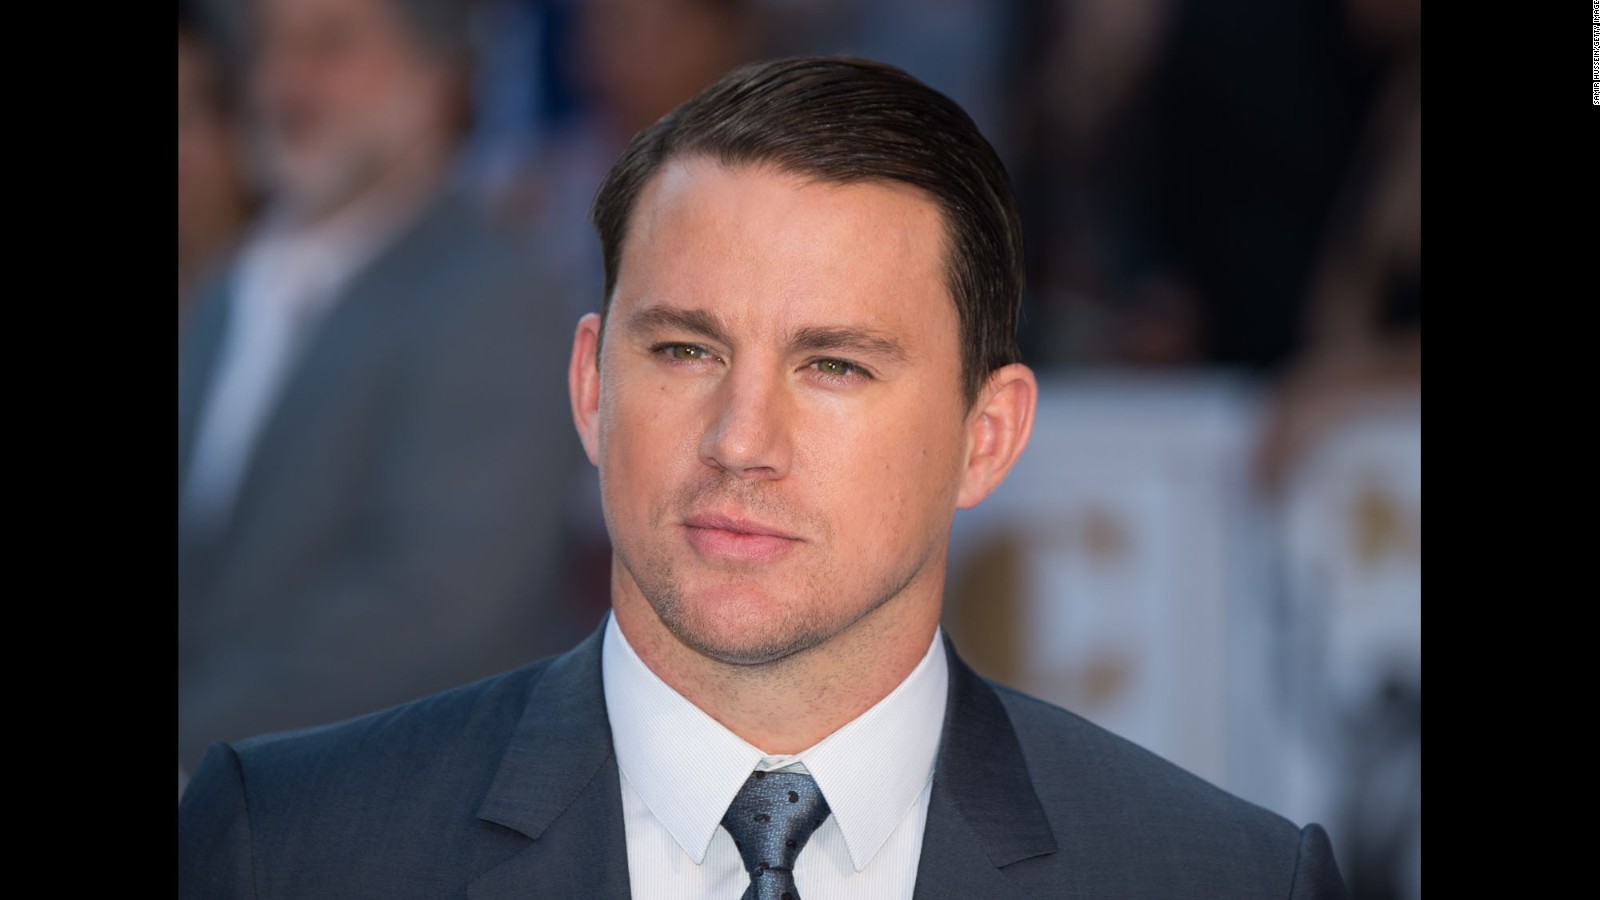 Channing Tatum shares touching post about his daughter